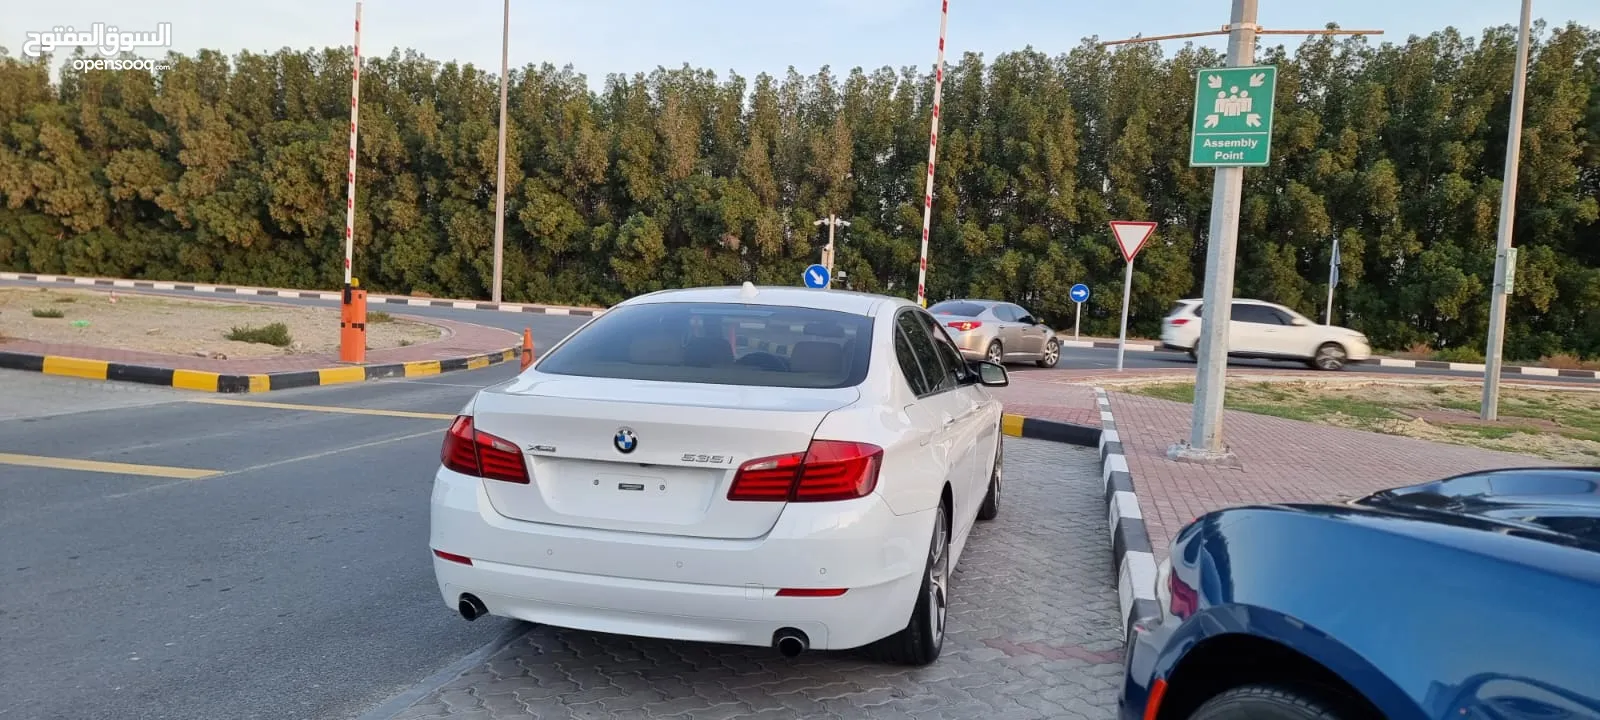 BMW 535i  2013 Full option  perfect condition